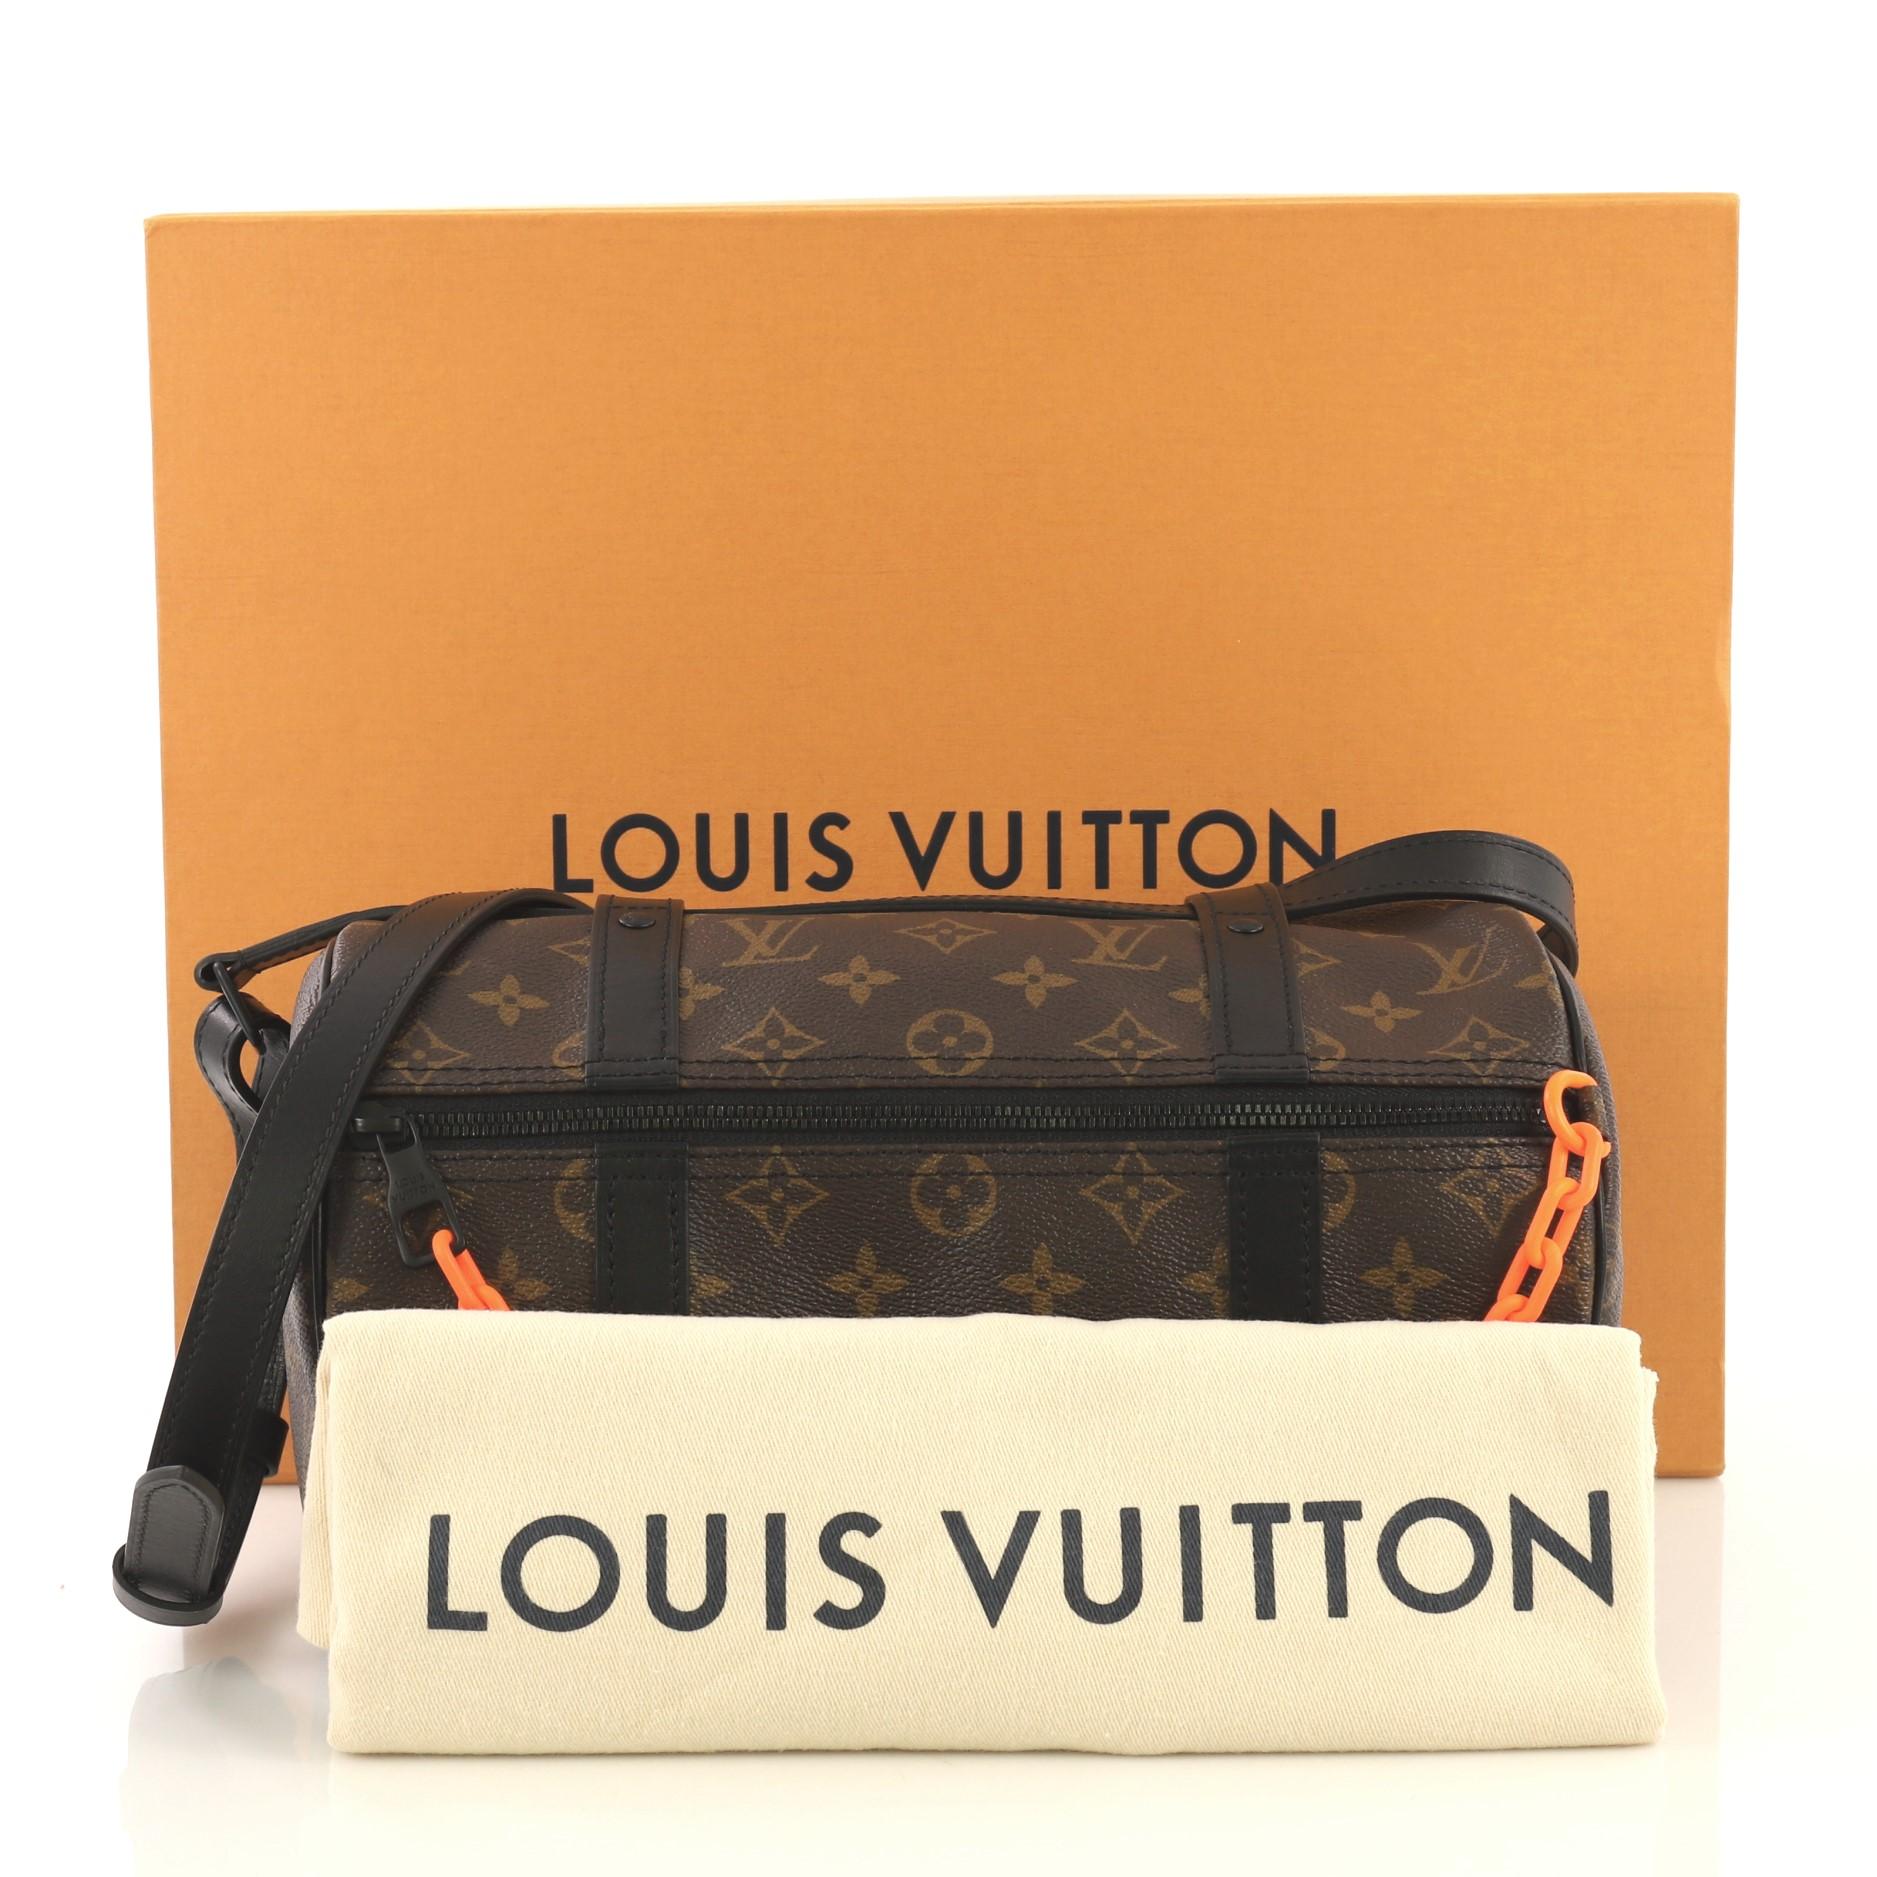 This Louis Vuitton Solar Ray Papillon Messenger Monogram Canvas Mini, crafted with monogram coated canvas and black leather, features an adjustable leather strap, leather trim, matte orange chain, and black-tone hardware. Its zip closure opens to a